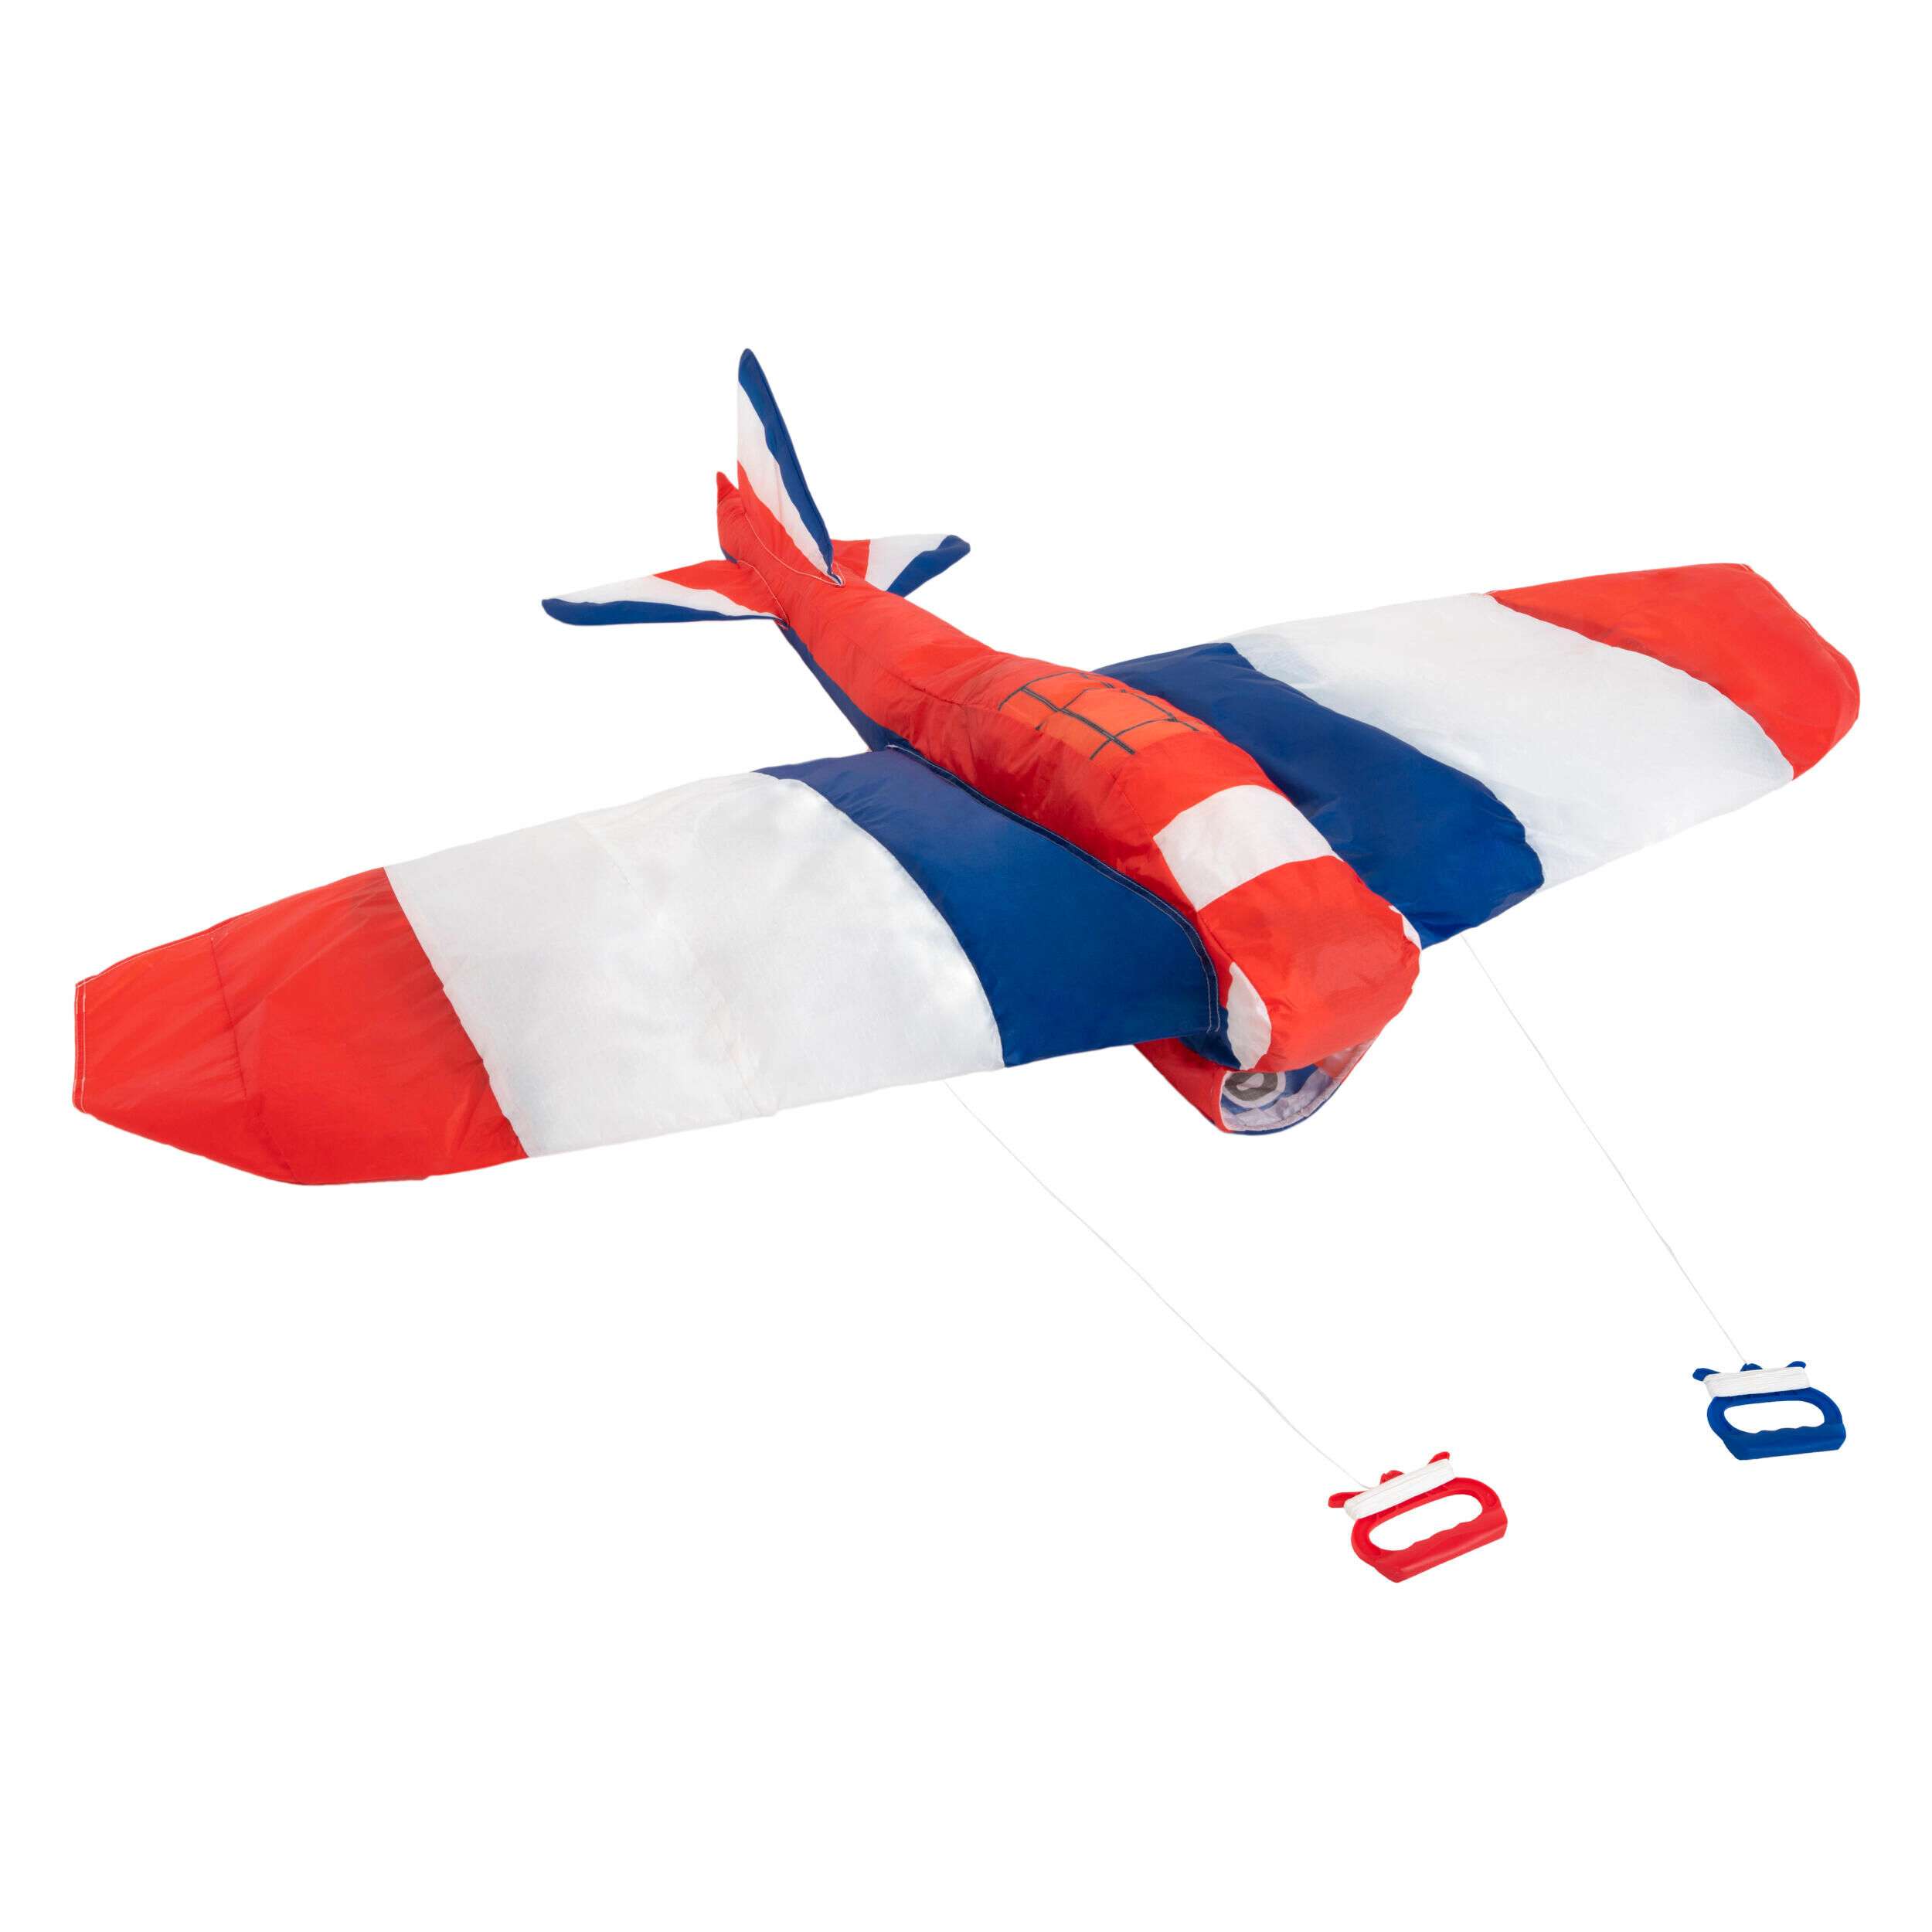 ORAO STUNT KITE "3D PLANE170" for kids - with handles